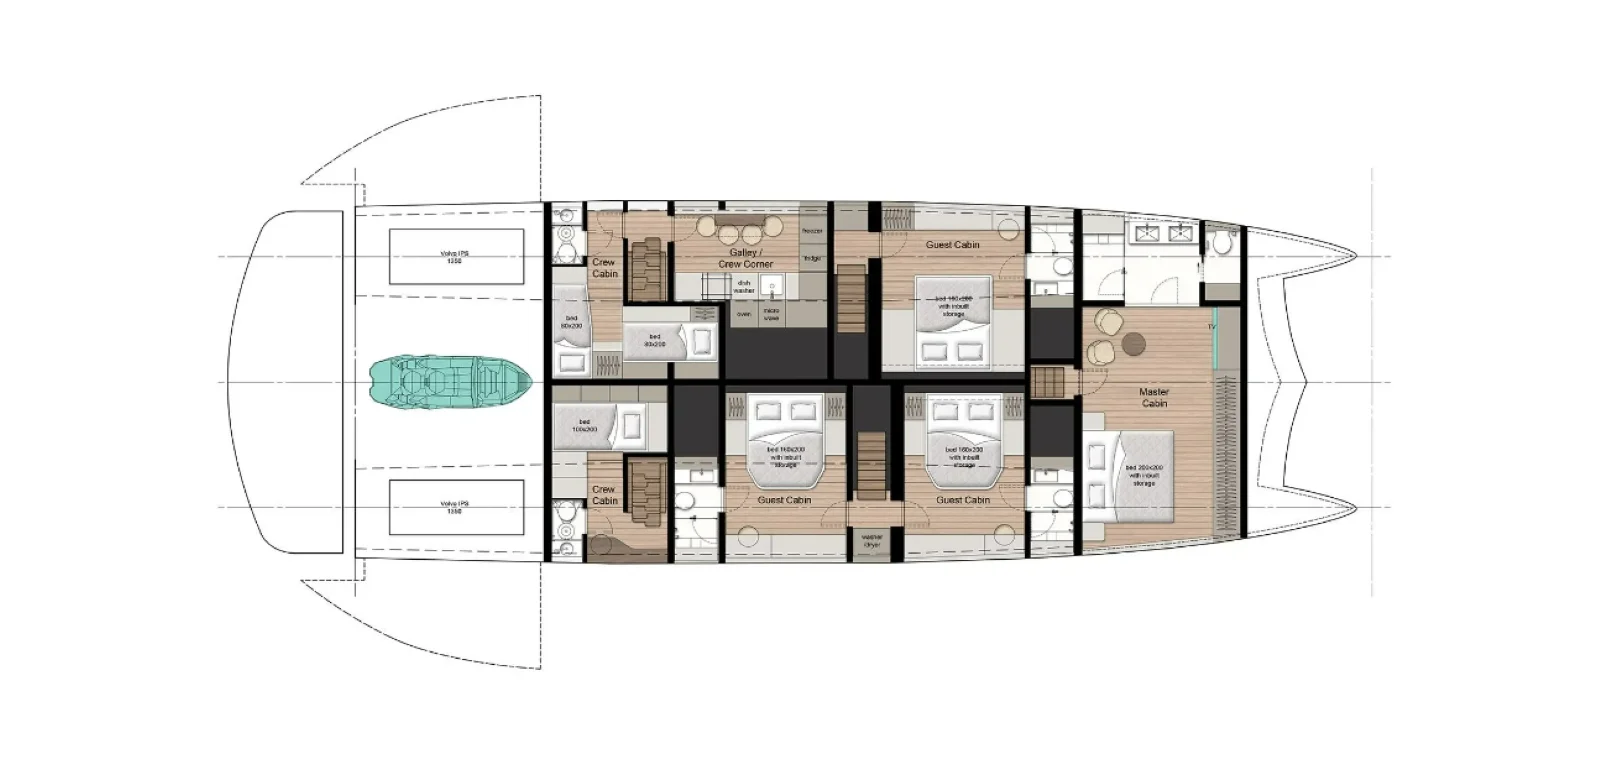 Lower deck: version with 4 cabins and a galley